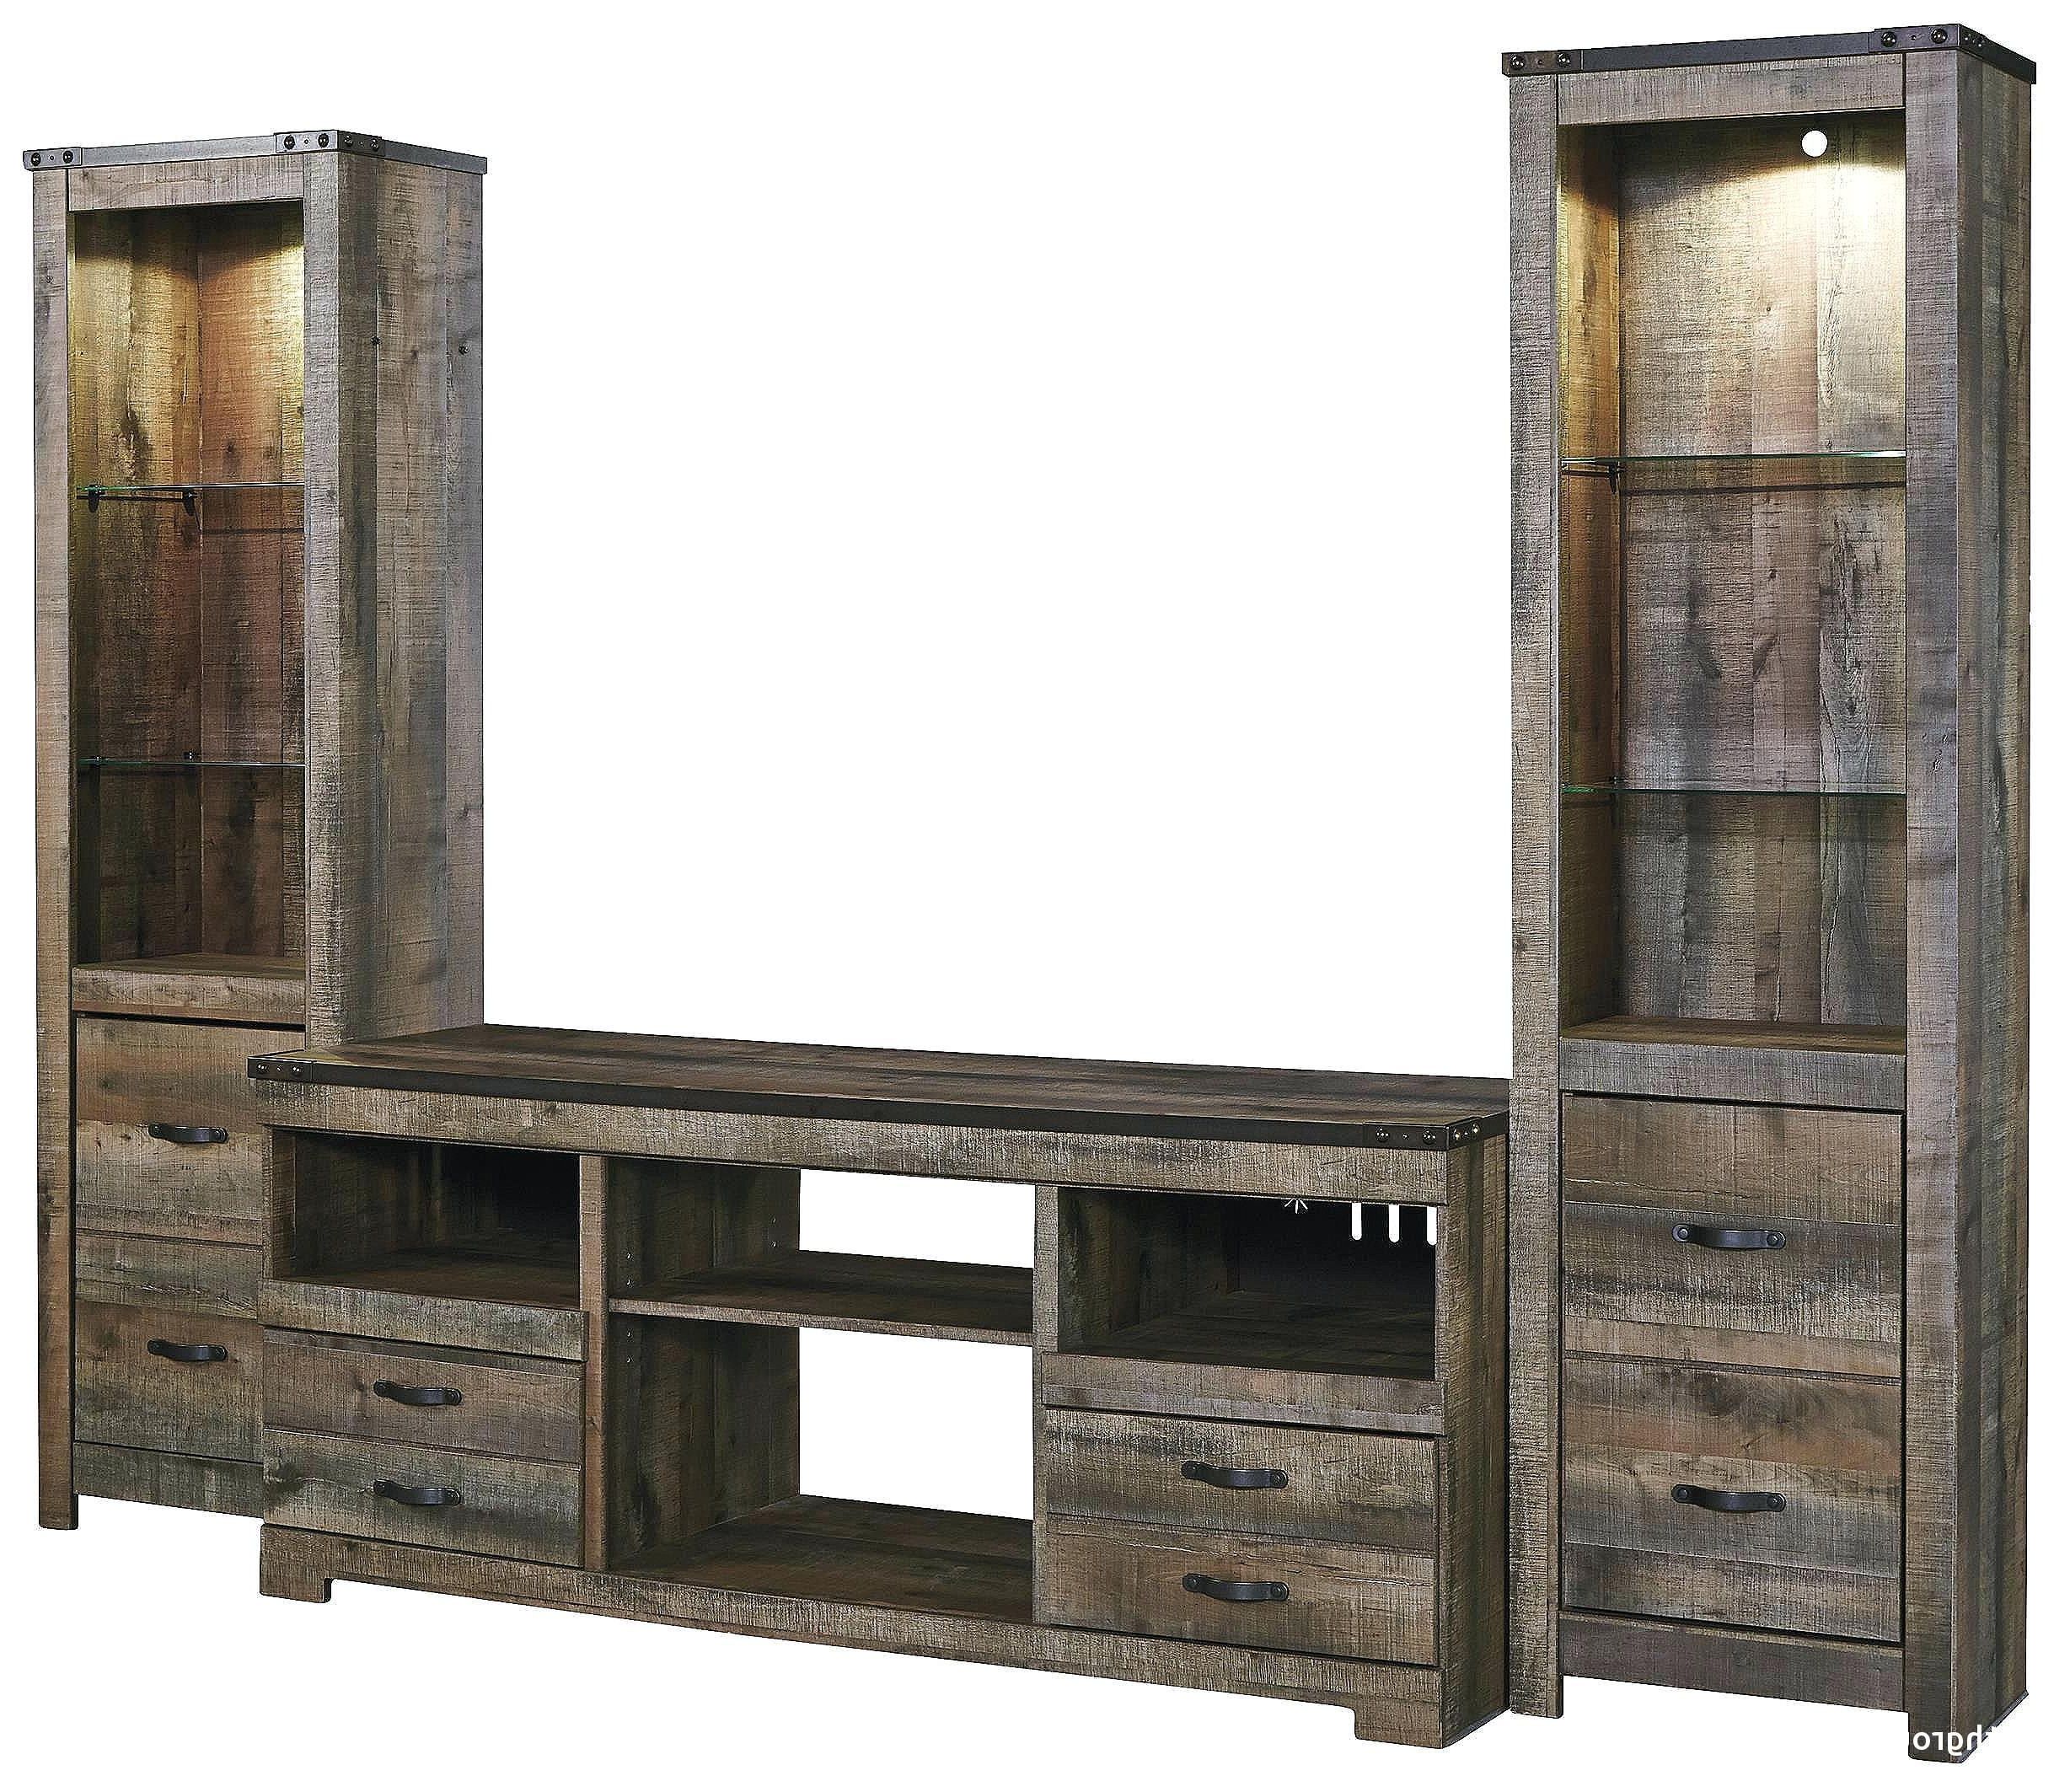 Current 17 Ideal Industrial Corner Tv Stand For Living Room Decor Throughout Industrial Corner Tv Stands (View 11 of 20)